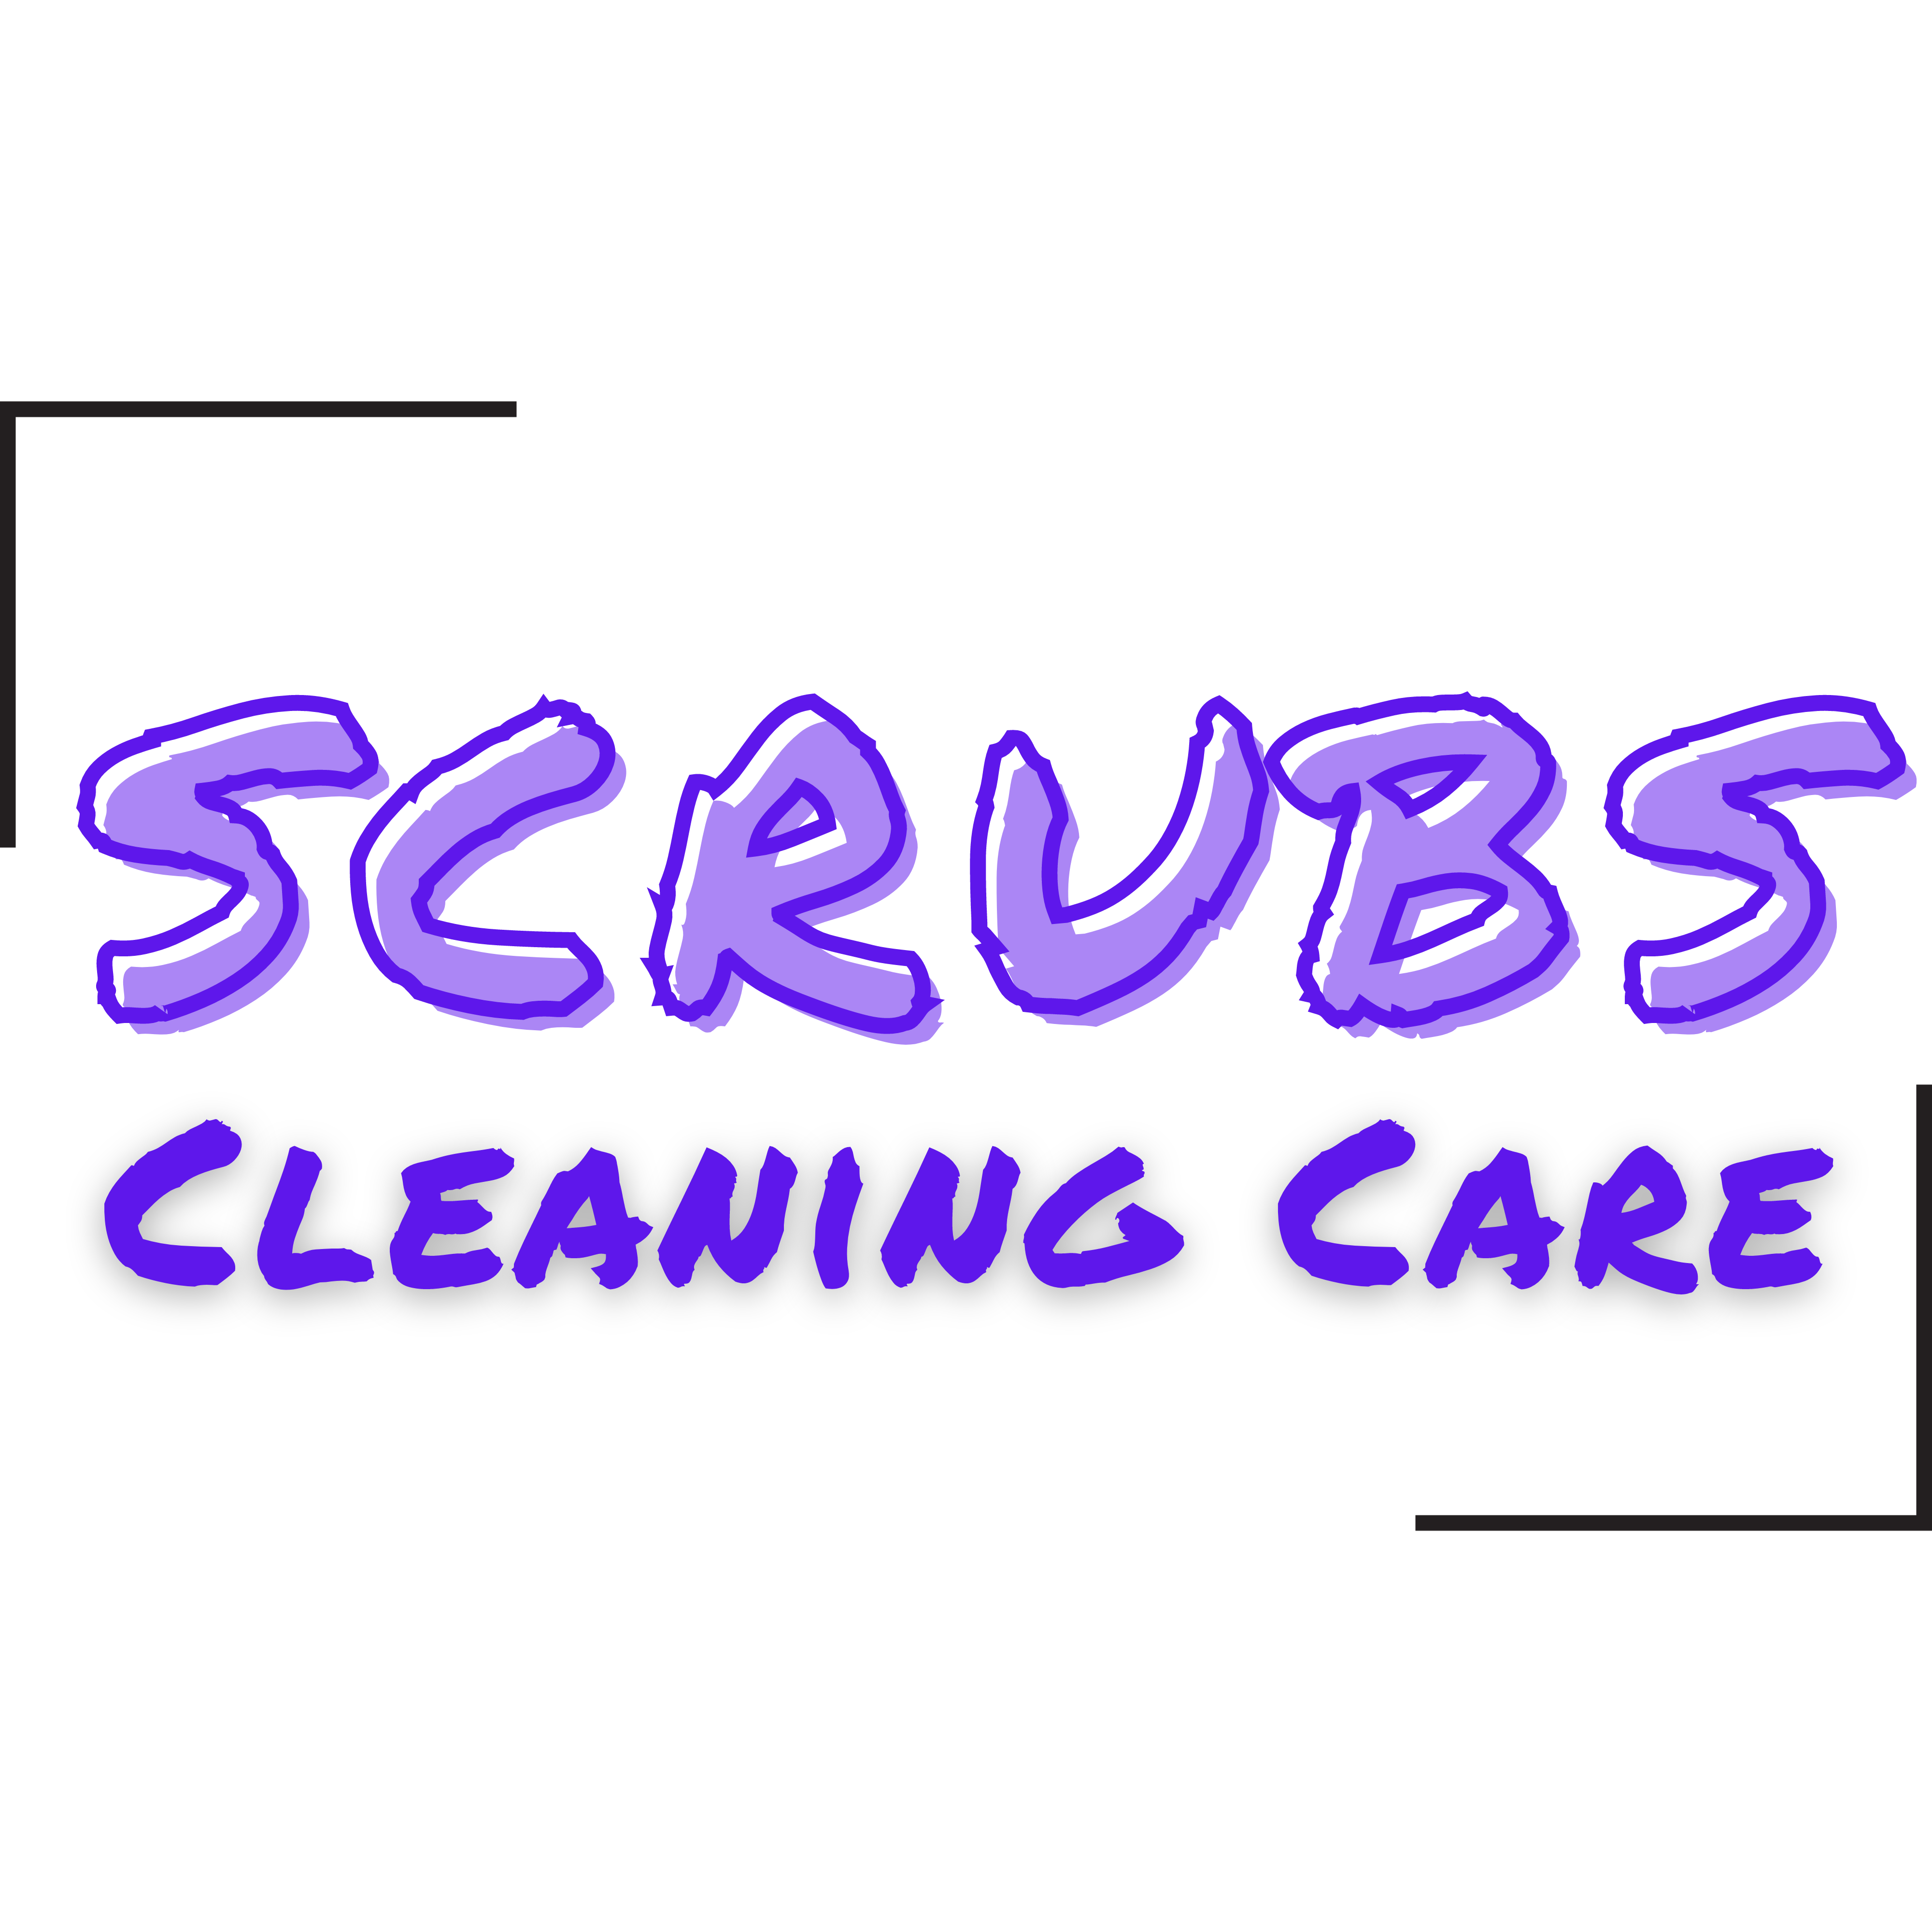 Scrubs Cleaning Care